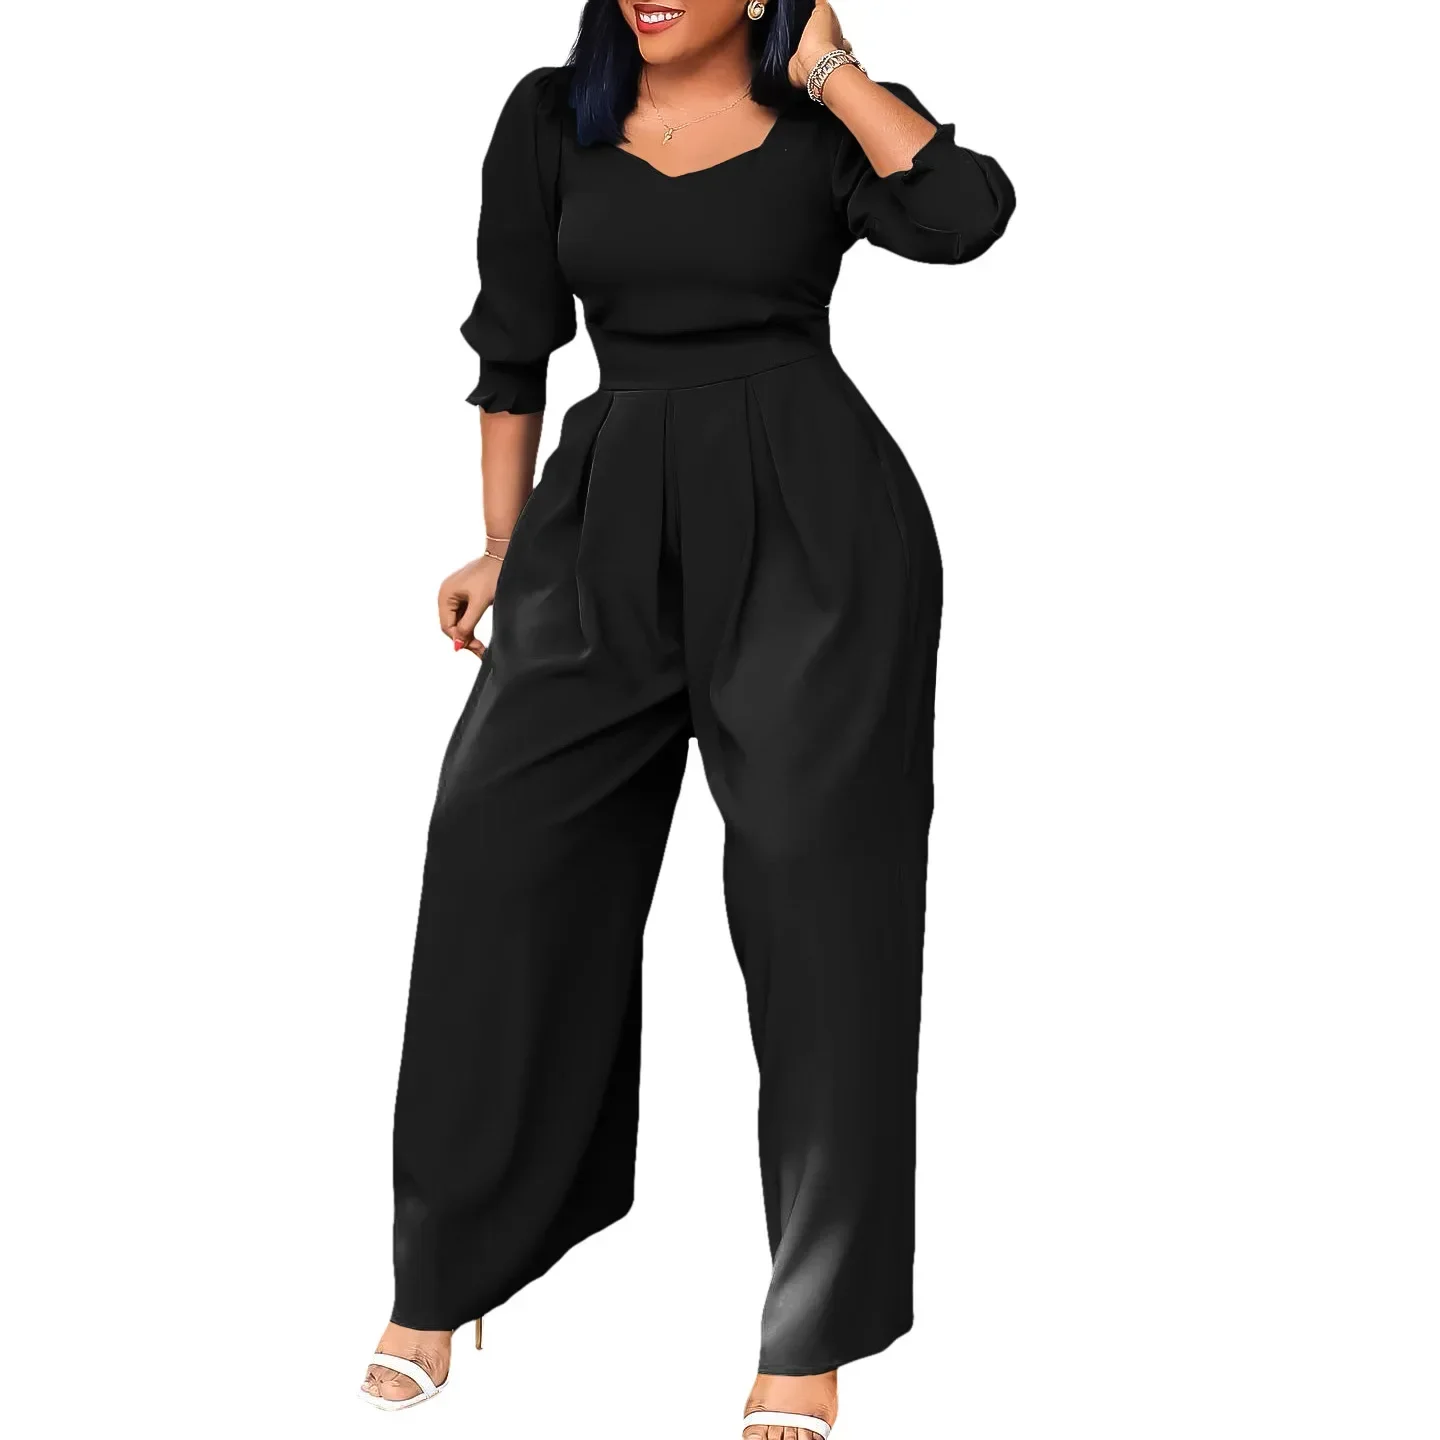 African Loose Jumpsuit Women Fashion Streetwear Jumpsuits Ladies Outfits Mamelucos Mujer Wide Leg Classy Party One Piece Romper sibybo sexy backless halter jumpsuit women summer cut out tight horn leg jumpsuits elegant ladies night party rompers outfits